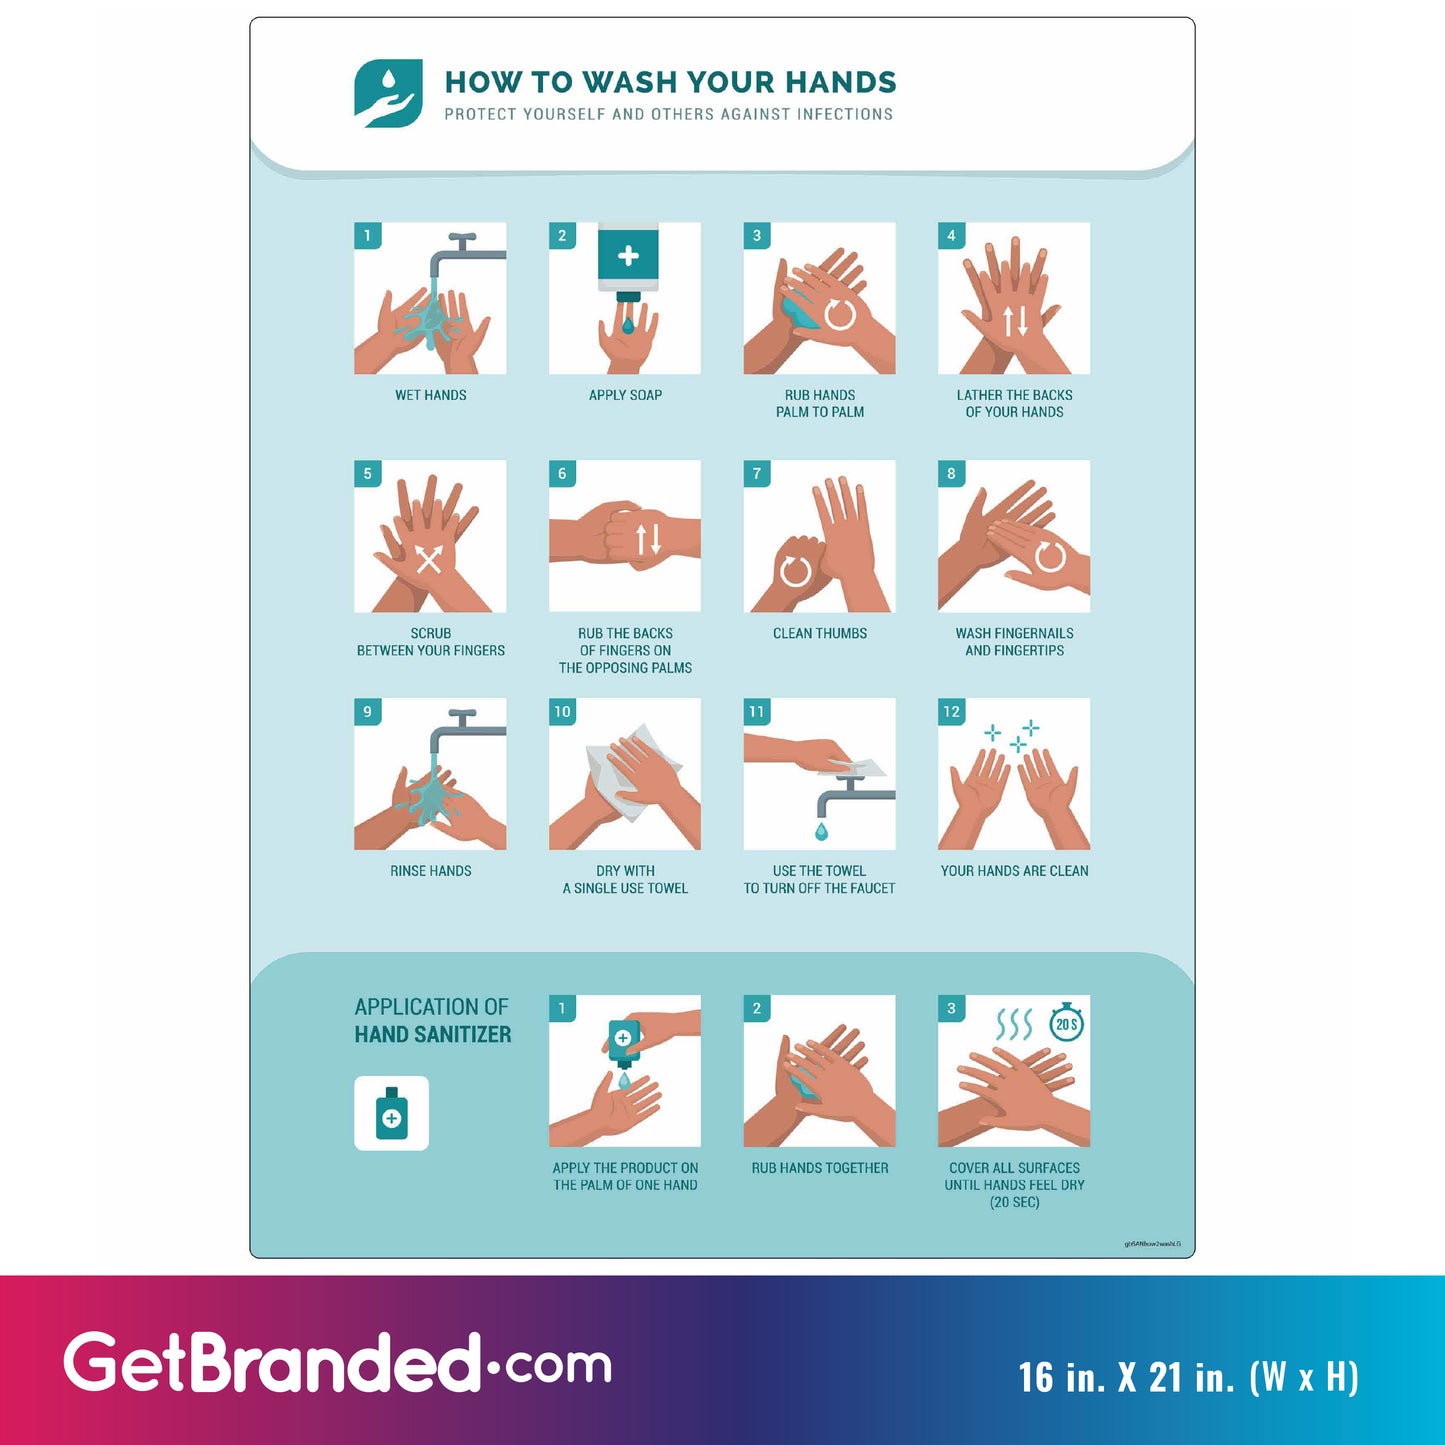 How to Wash Your Hands Decal. 16 inches by 21 inches size guide.